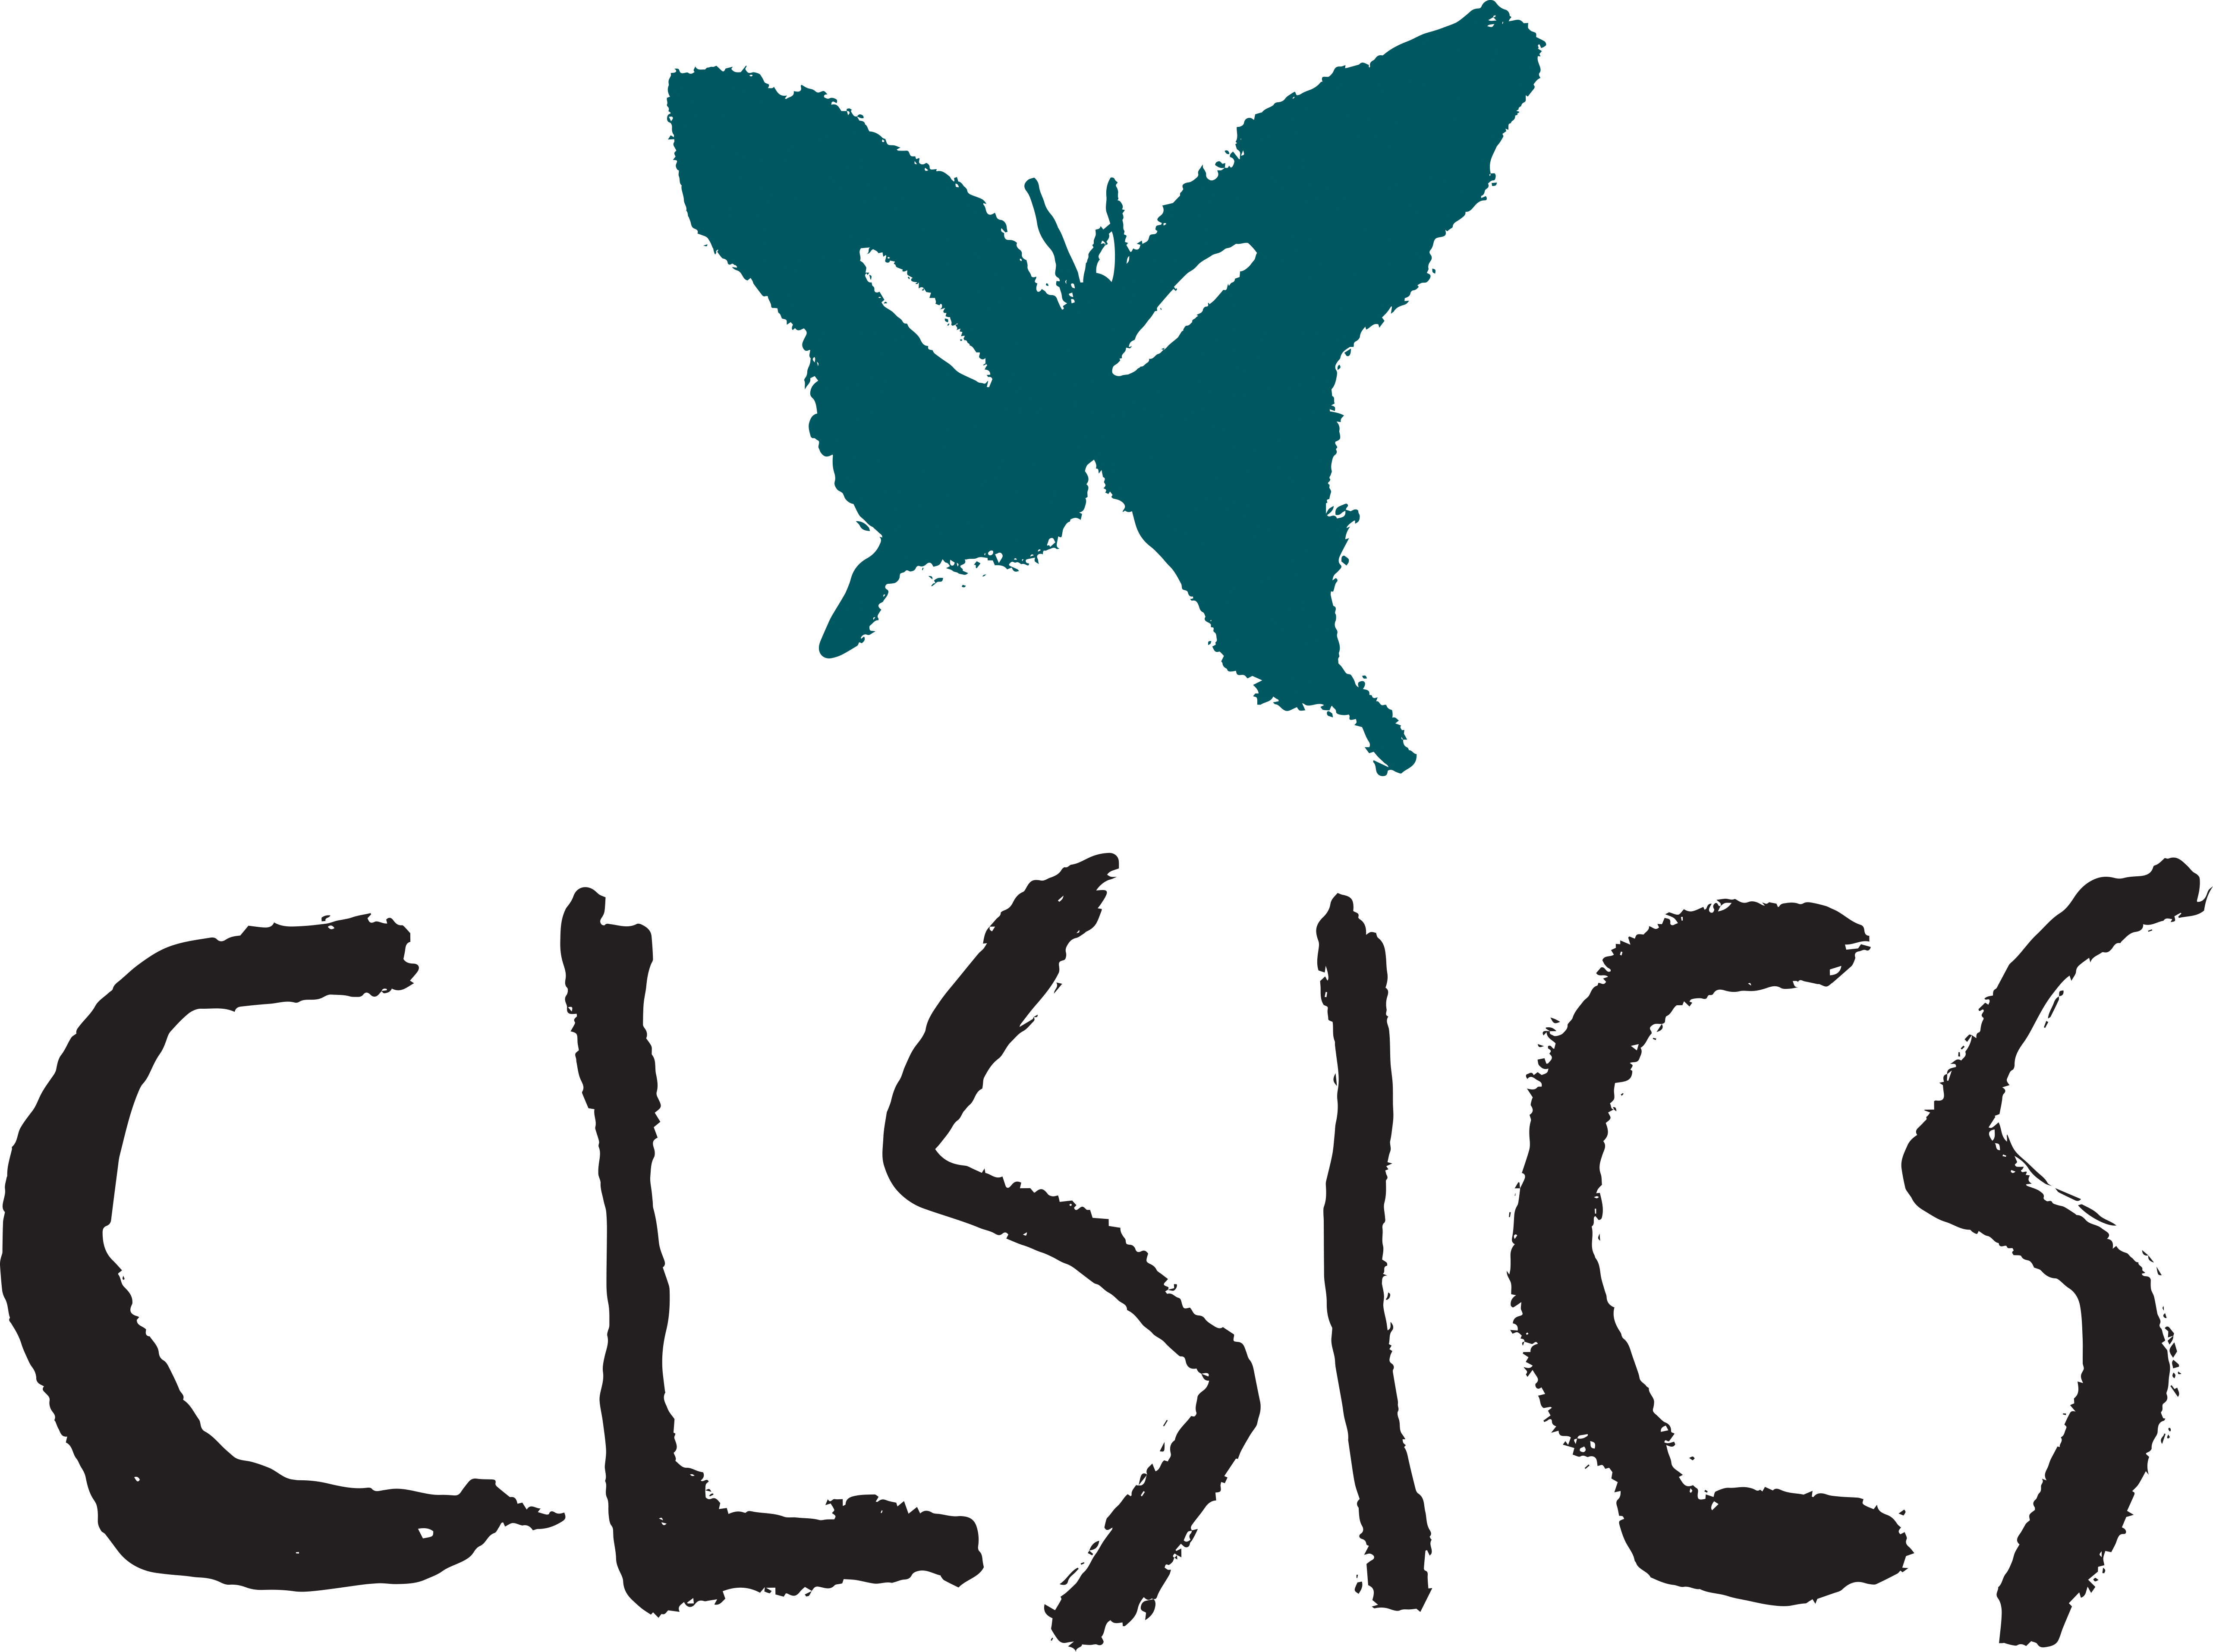 The logo of CLSICS